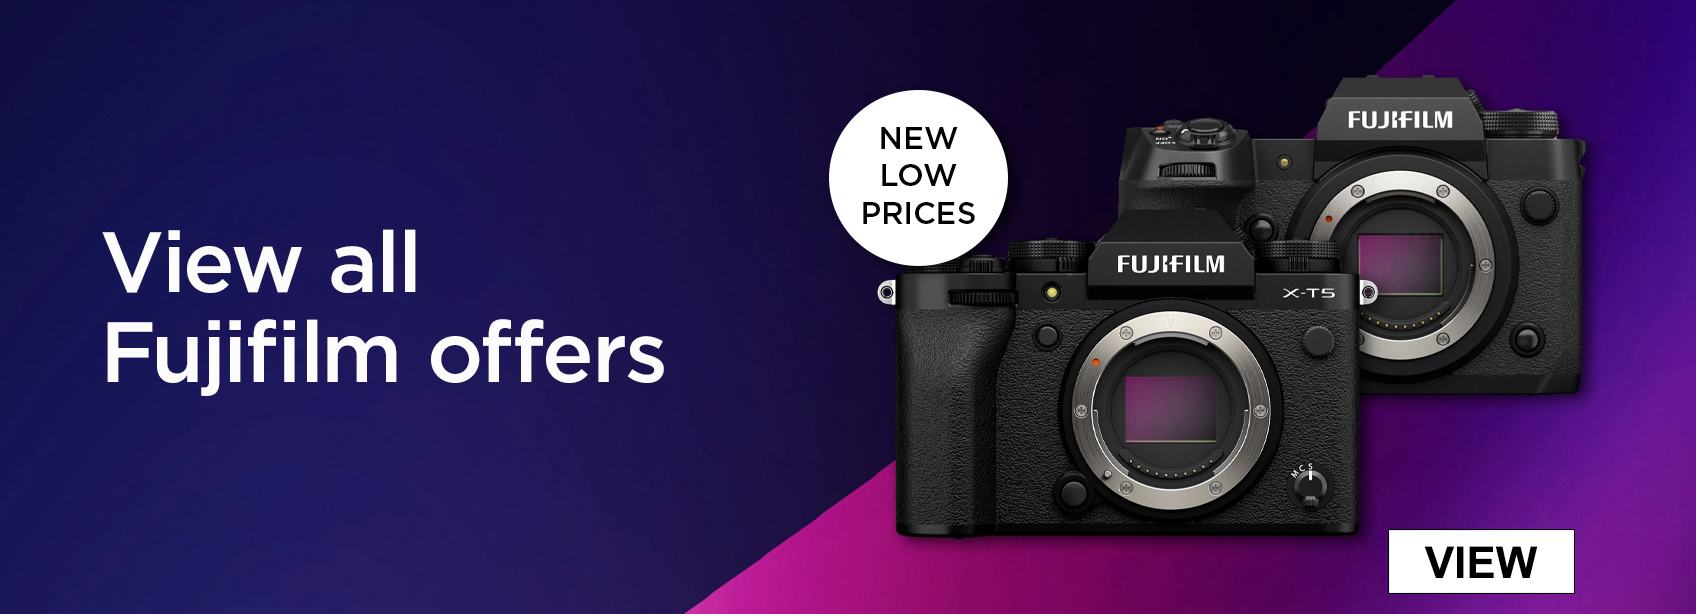 View all Fujifilm offers. New low prices. 